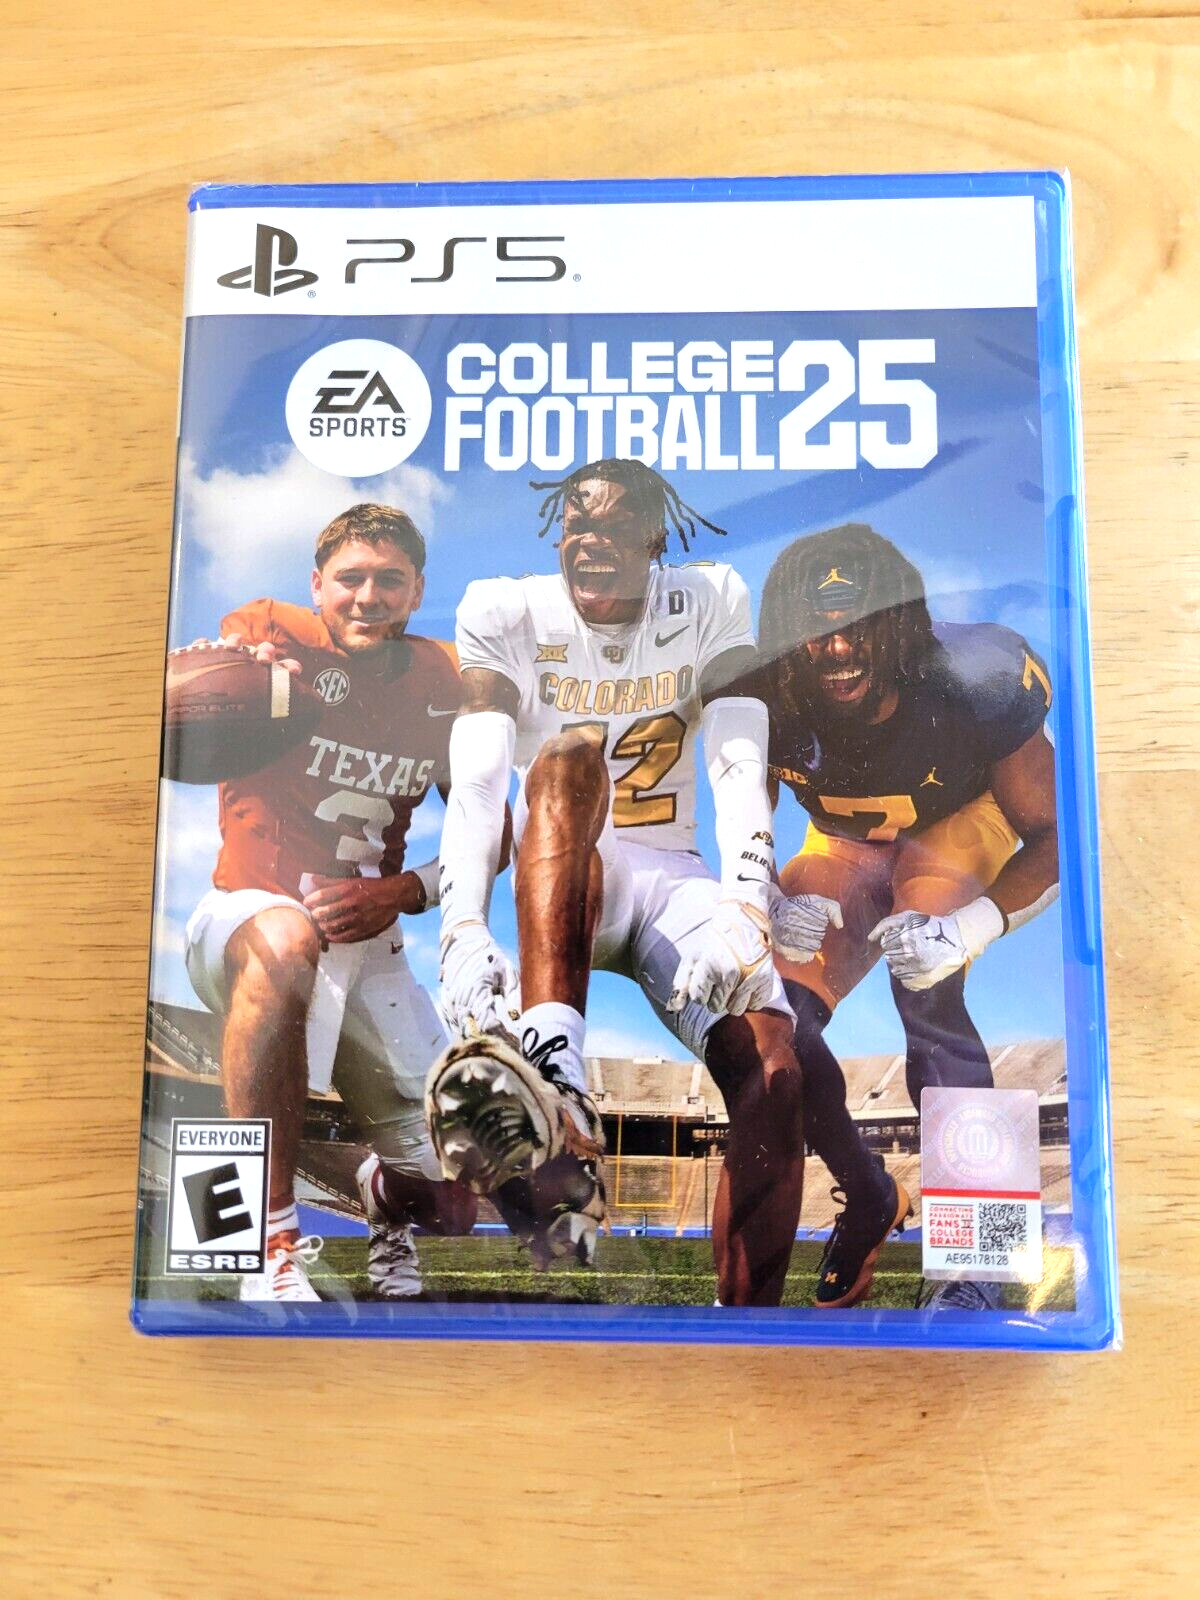 PS5 - College Football 25 (Brand NEW & Sealed) - EA Sports Game PlayStation 5